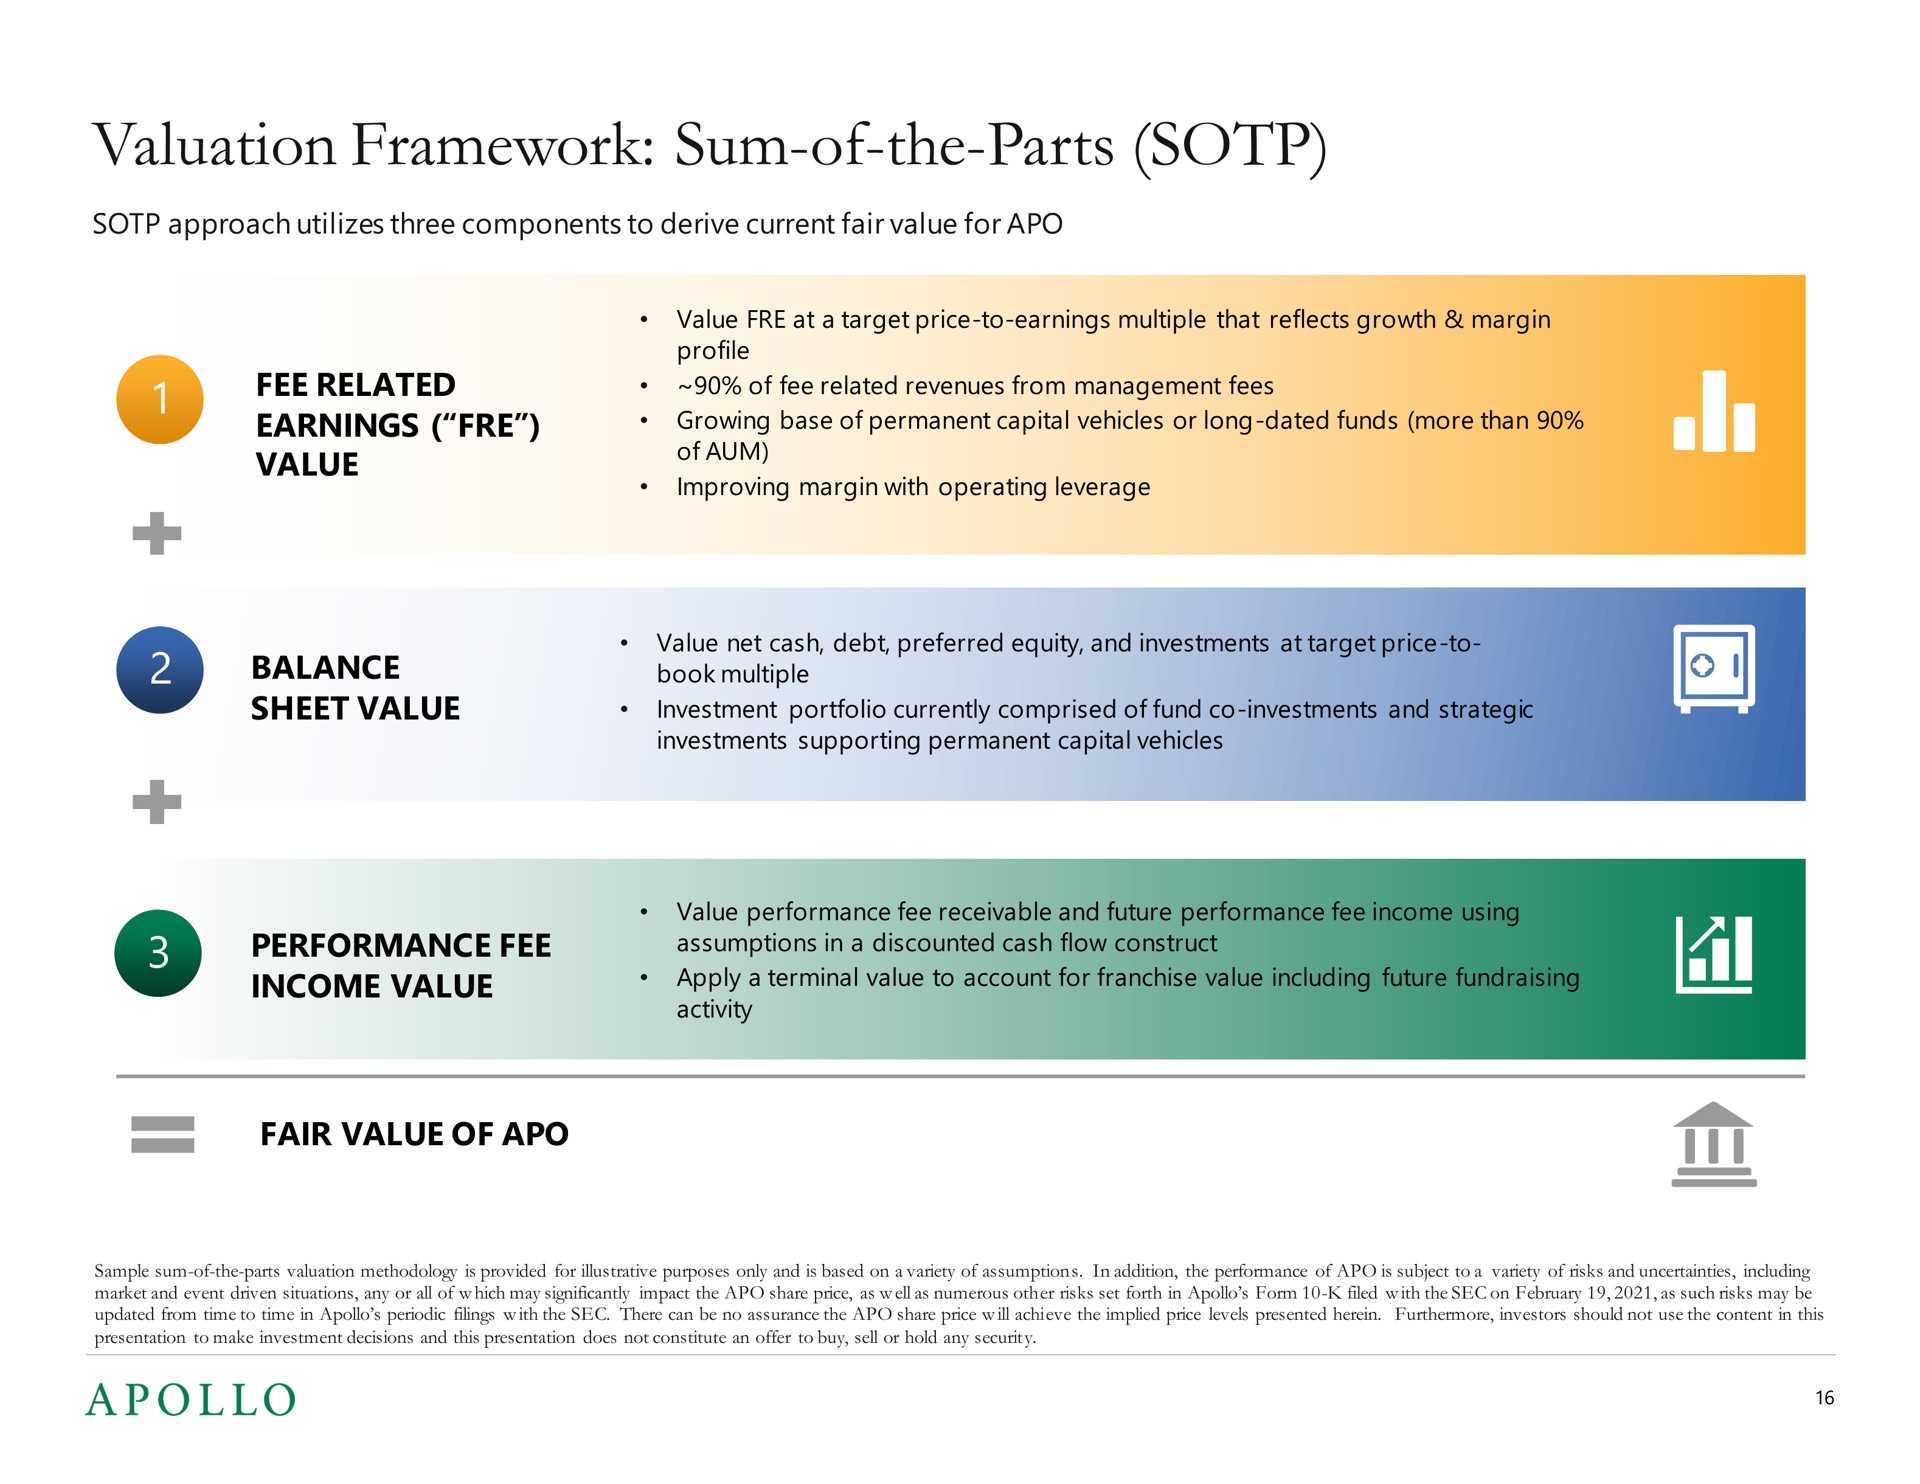 valuation framework sum of the parts income value | Apollo Global Management